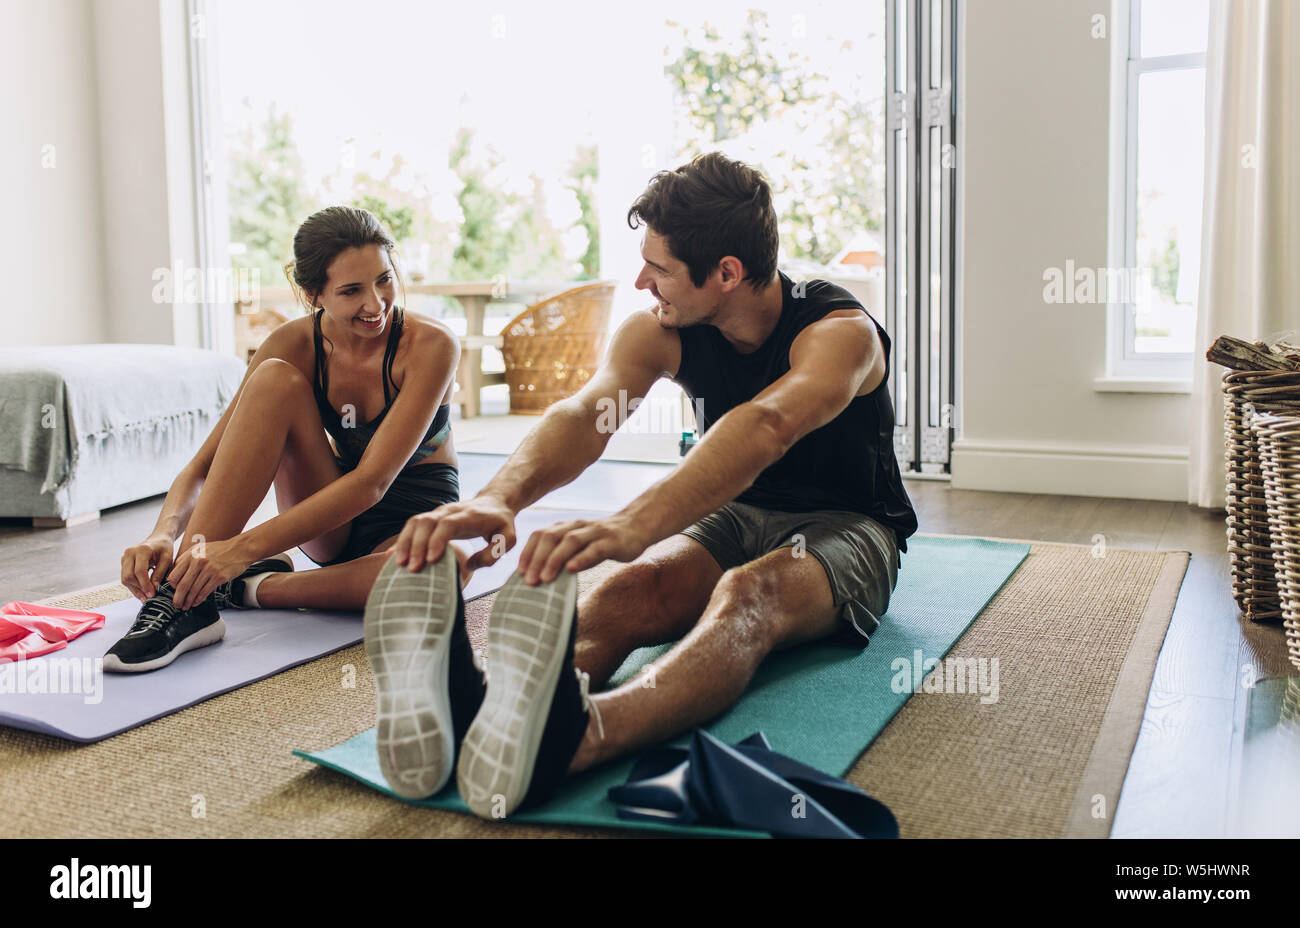 Couple exercising together. Man and woman in sports wear doing workout at home. Stock Photo